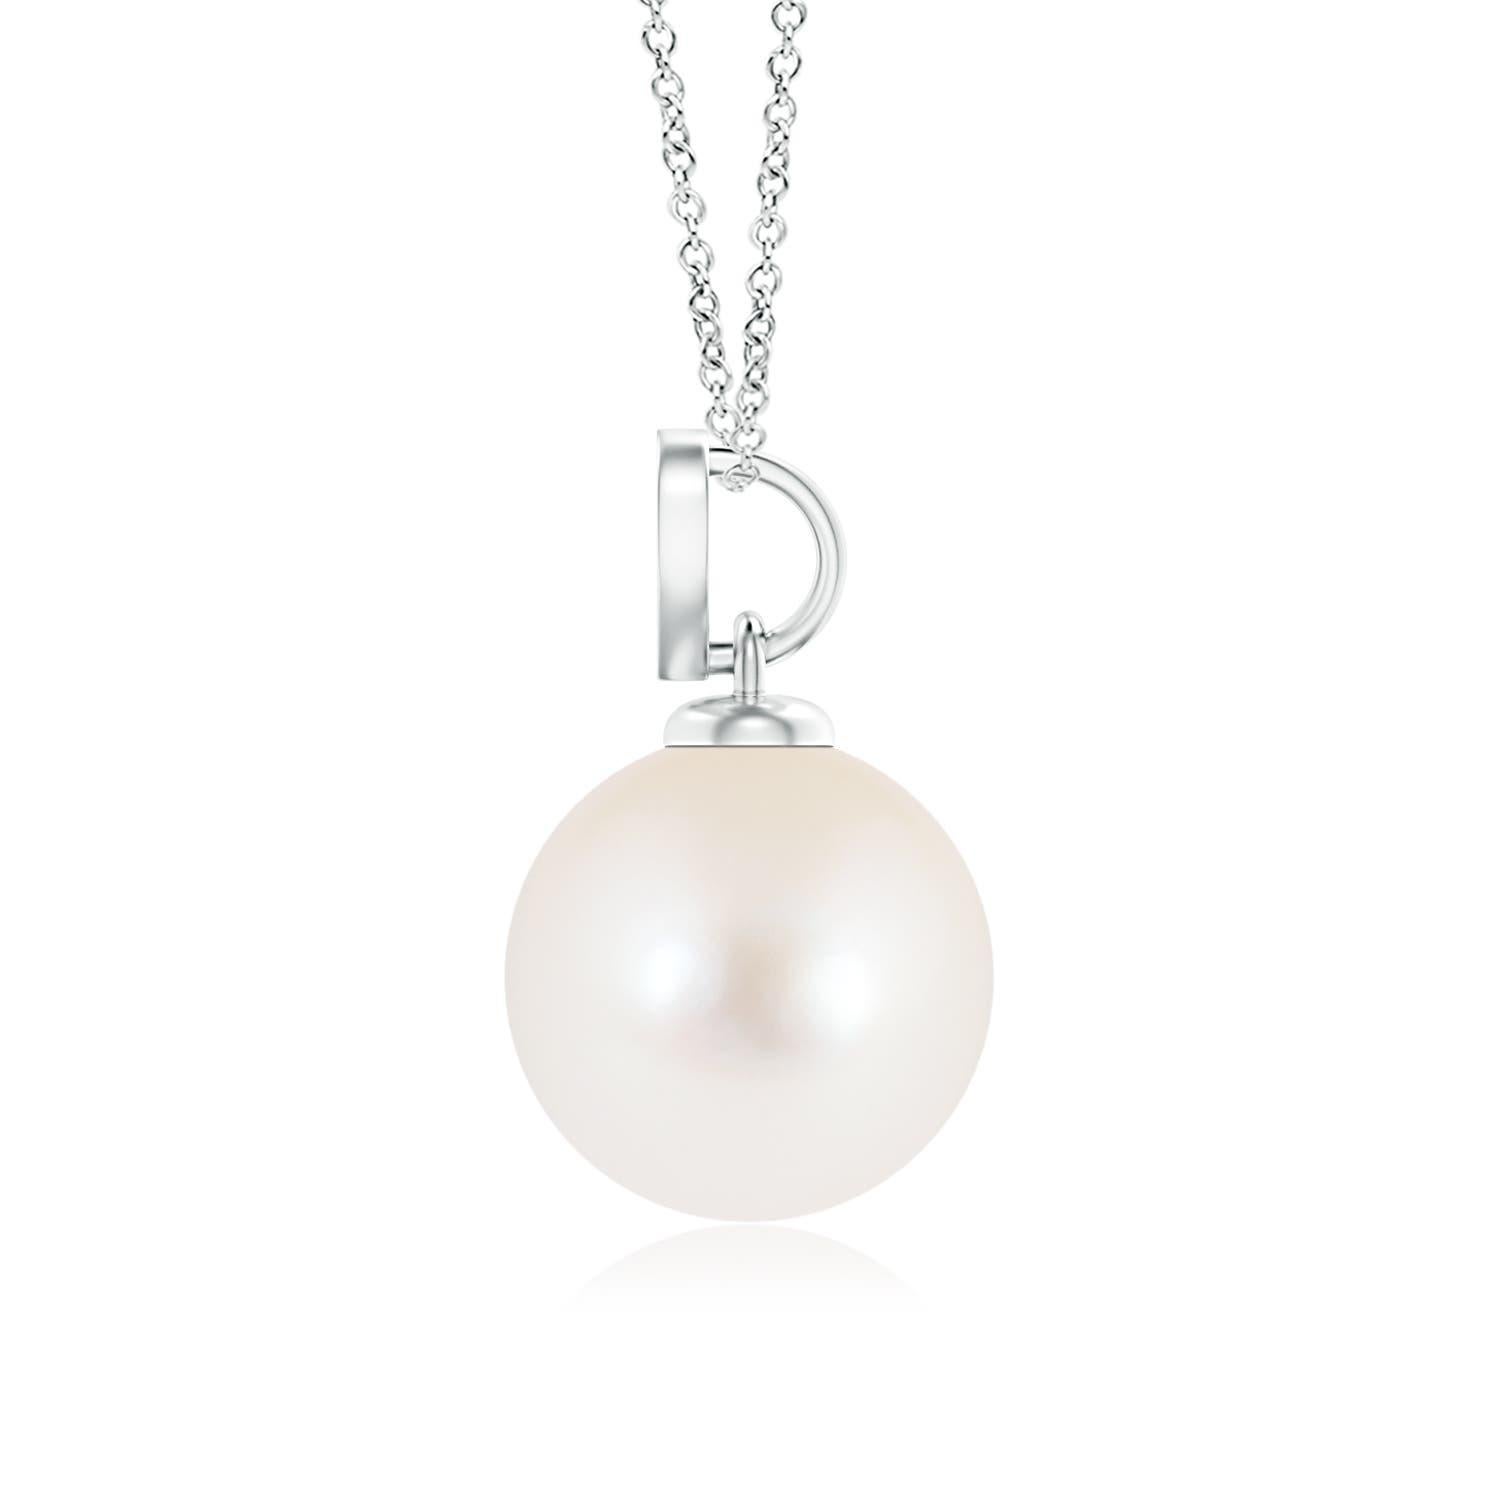 Nothing connotes love better than this charming diamond heart pendant in 14K white gold. It features a round Freshwater cultured pearl that illuminates with its delightful hue, while the diamond studded heart motif adds a romantic touch to the